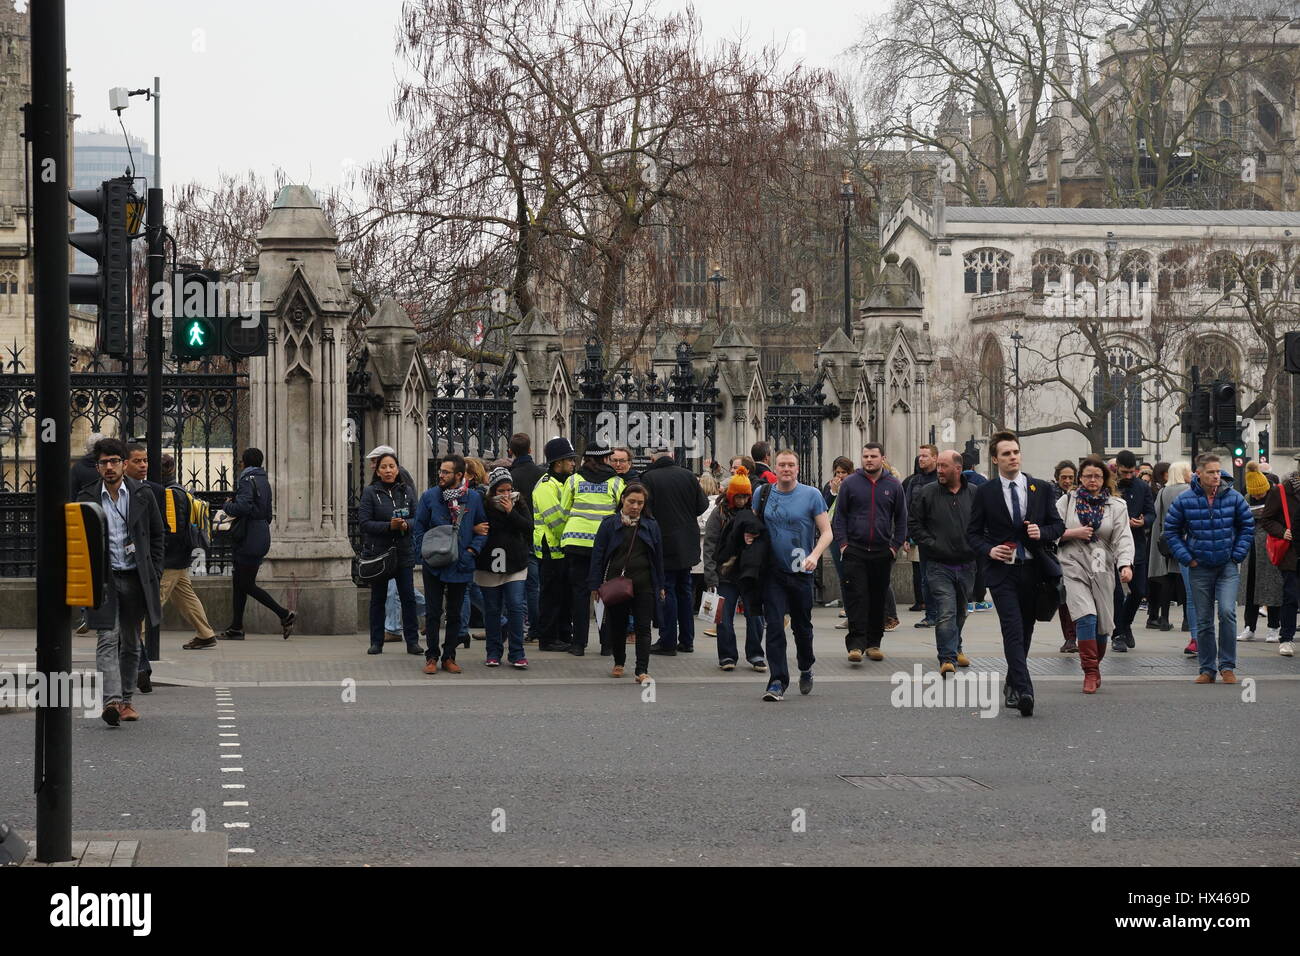 London, UK. 23rd Mar, 2017. The scene outside the Houses of Parliament in the wake of the murder of PC Keith Palmer by Khalid Massood, also known as Adrian Elms, also known as Adrian Russell Ajao on Wednesday 21 March 2017. Members of the public pay floral tribute whilst television journalists make their reports and police officers survey the scene. Credit: Peter Hogan/Alamy Live News Stock Photo